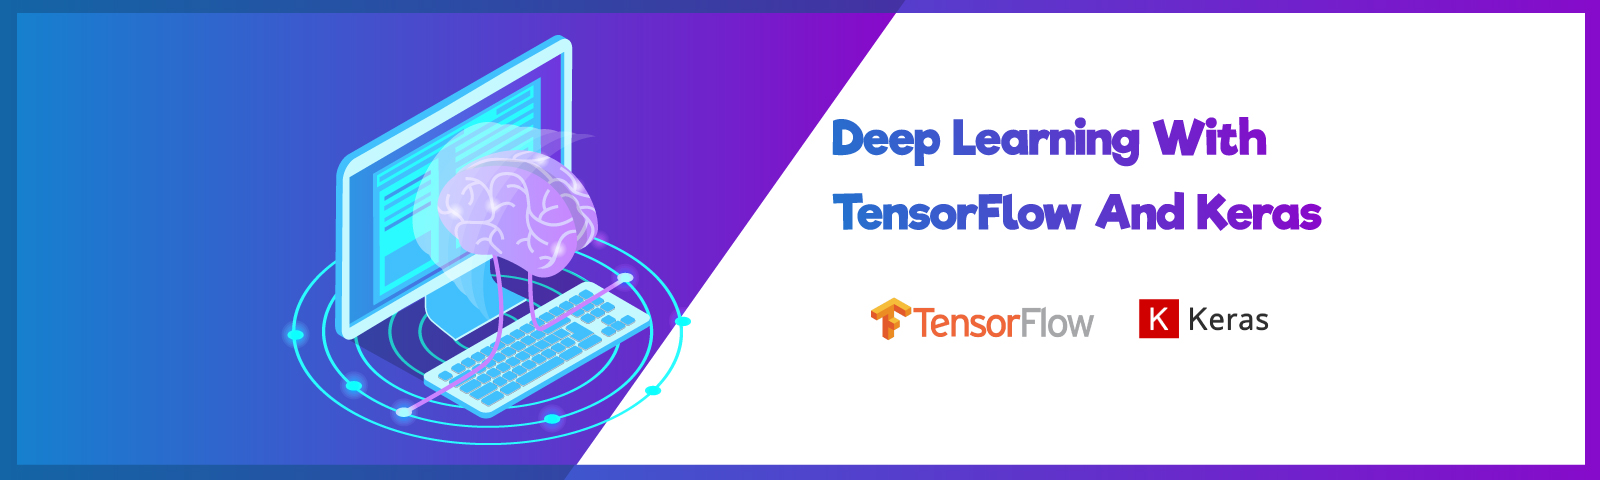 Intro to Deep Learning with Tensorflow and Keras